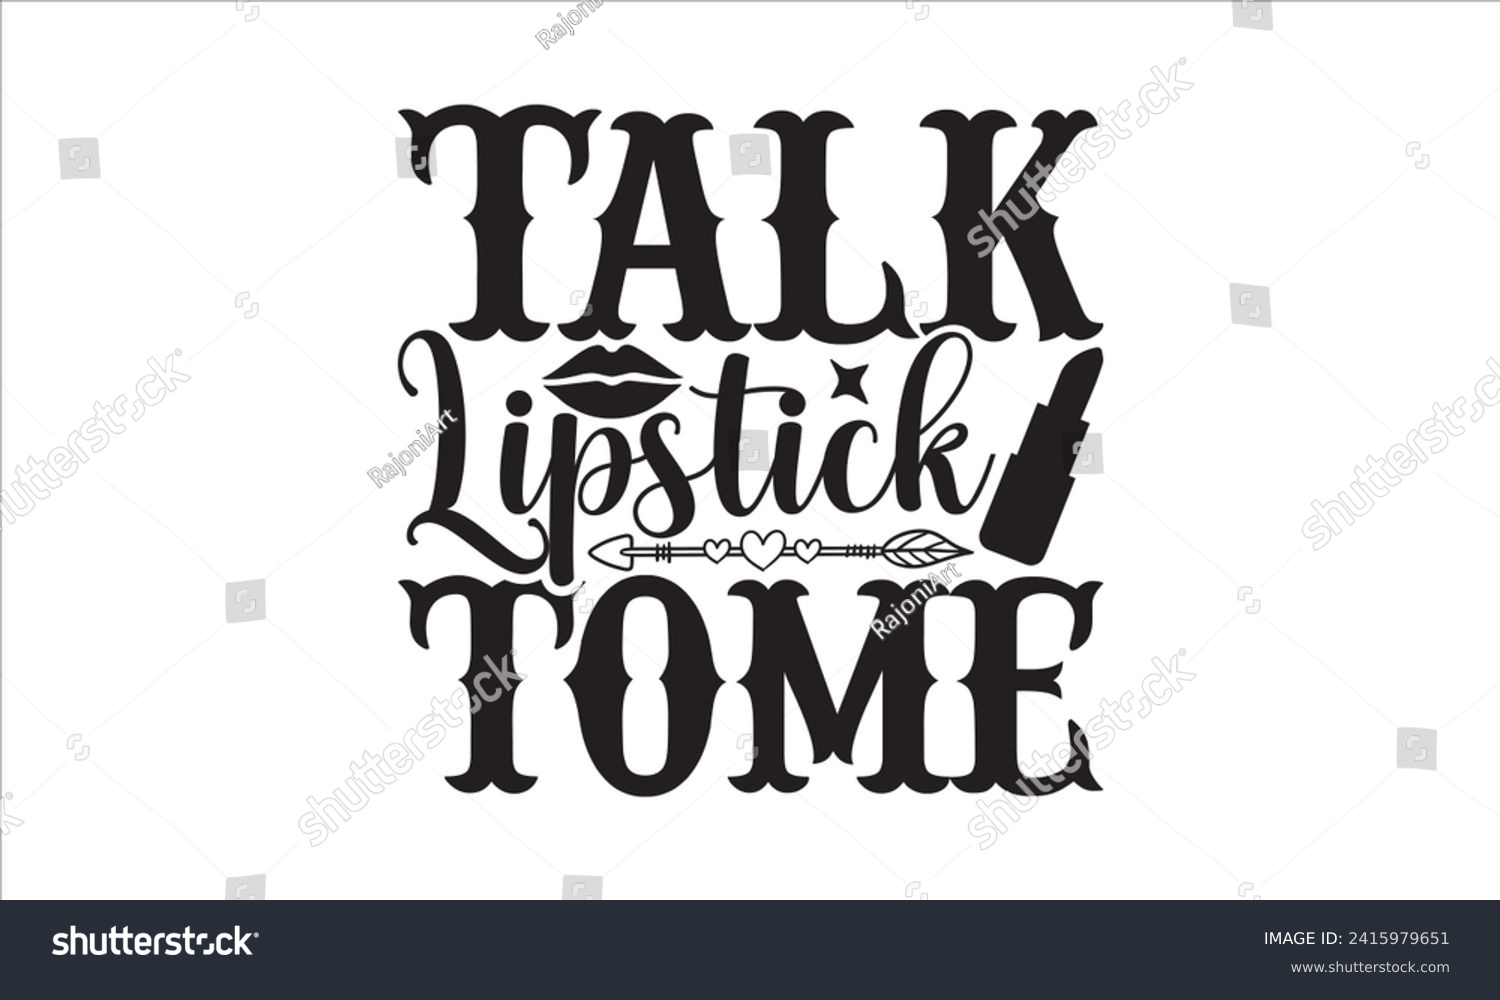 SVG of Talk lipstick tome - Nail Tech T-Shirt Design, Vector illustration with hand drawn lettering, Silhouette Cameo, Cricut, Modern calligraphy, Mugs, Notebooks, white background. svg